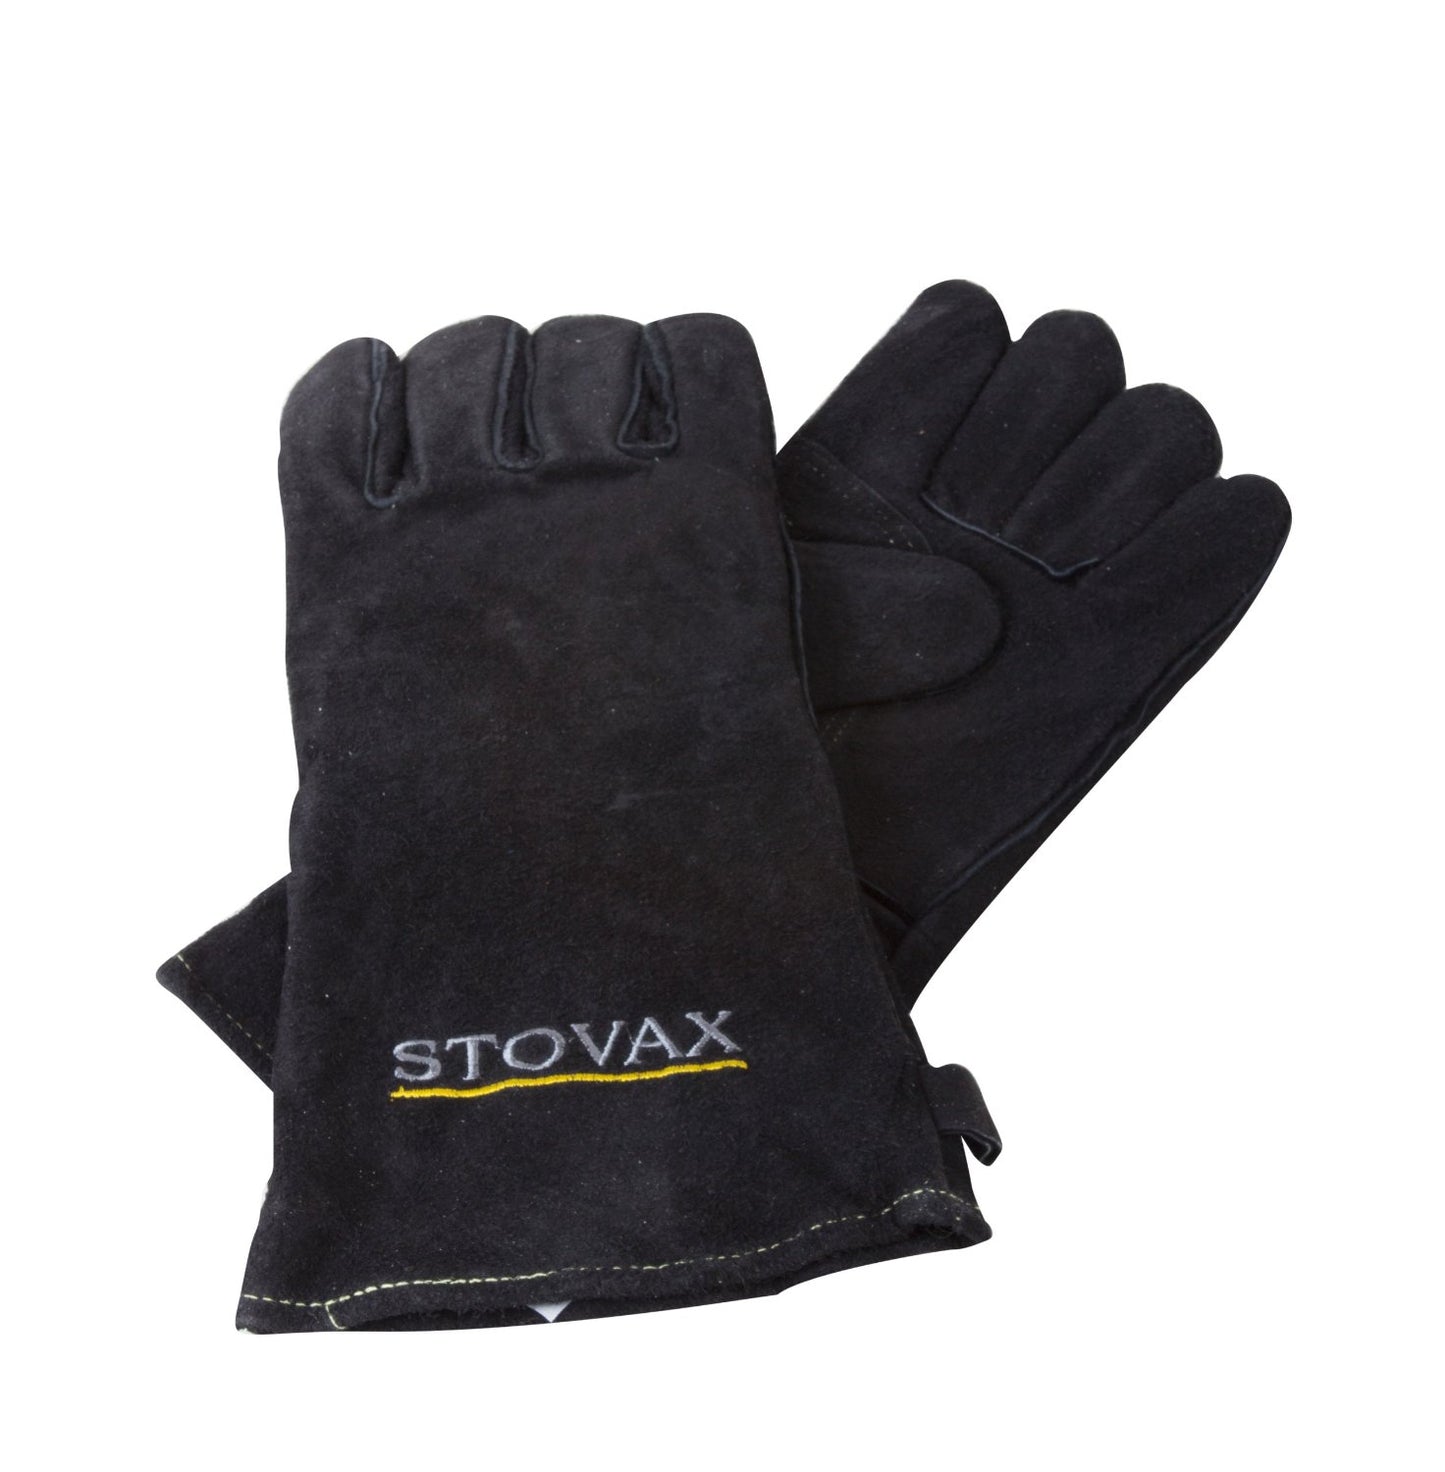 Stovax Leather Heat Resistant Gloves